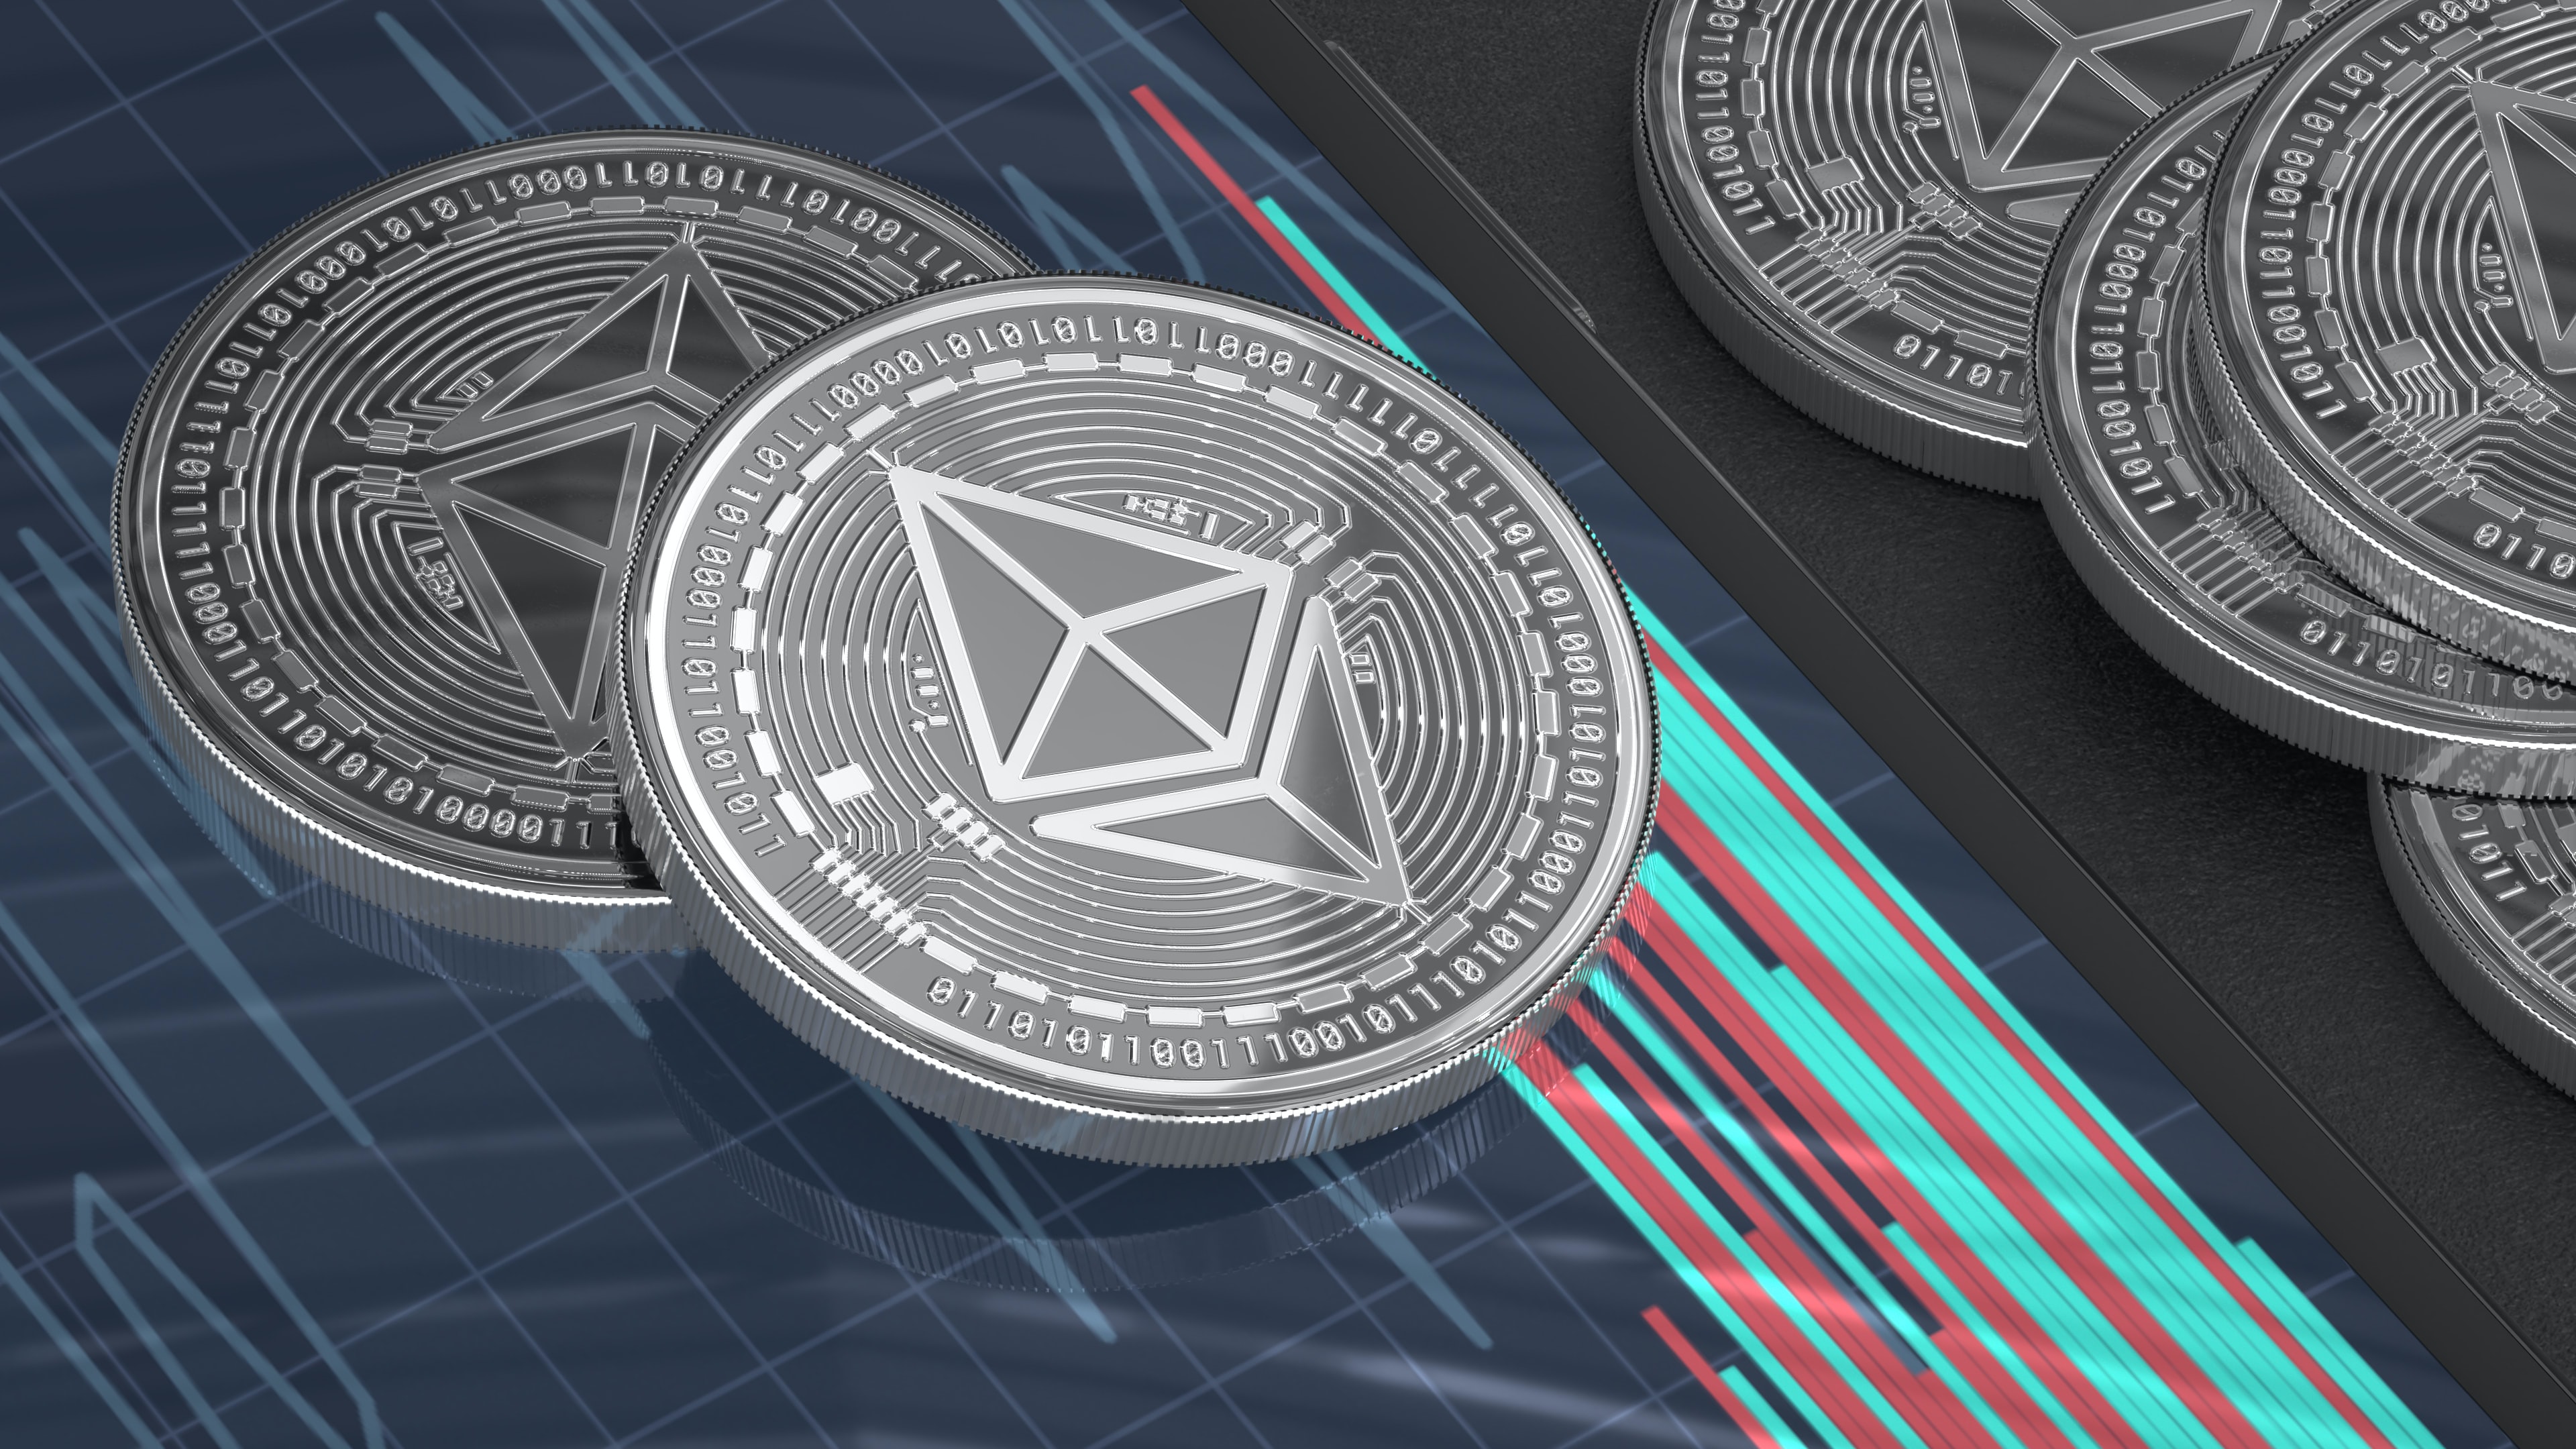 Ethereum's Shanghai Hard Fork Is Nearing, But When Can I Withdraw My Staked Ether (ETH)?